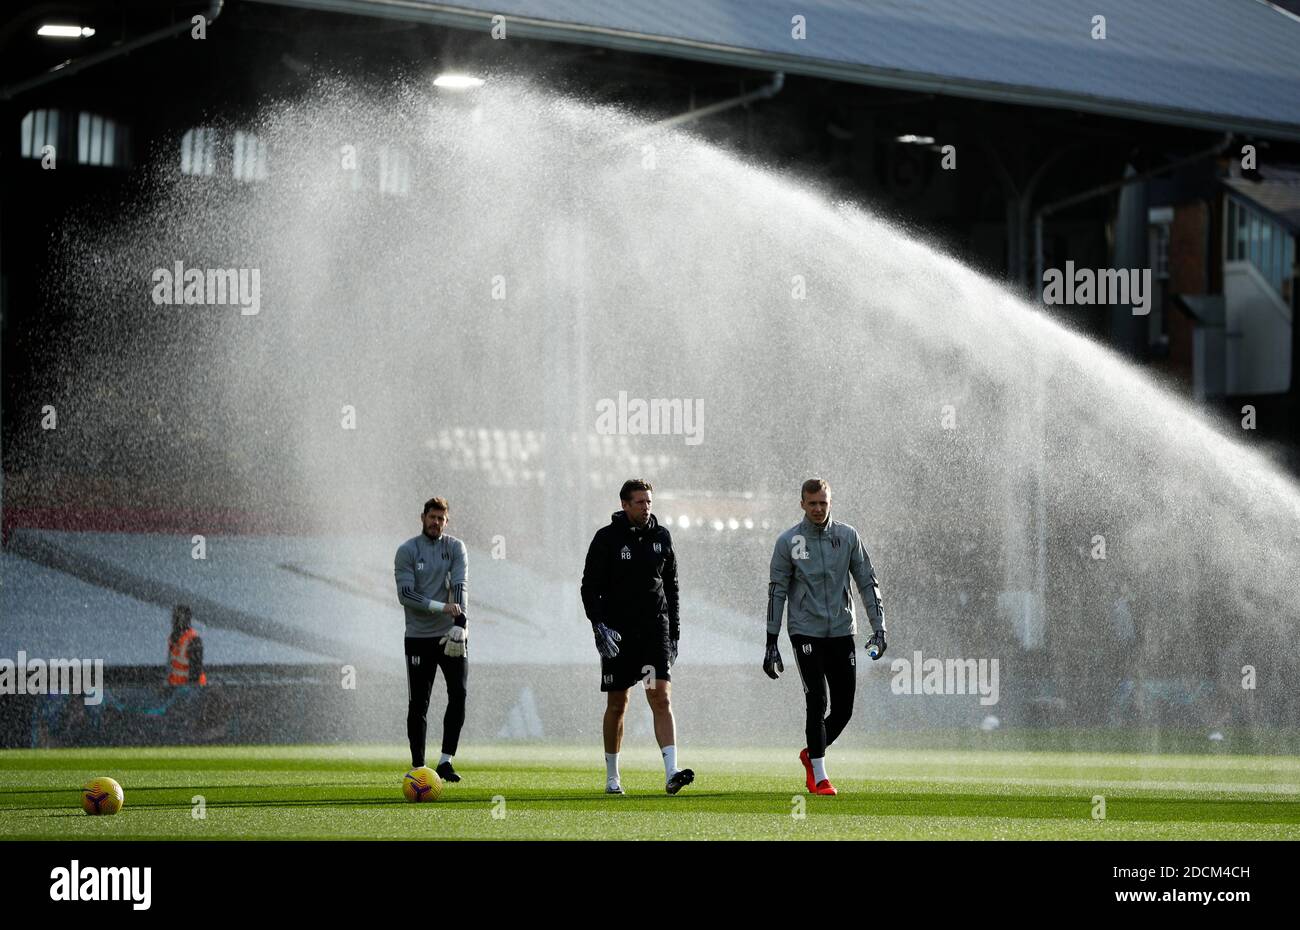 Fulham goalkeepers Fabri (left) and Marek Rodak (right) come out to warm up alongside goalkeeping coach Rob Burch before the Premier League match at Craven Cottage, London. Stock Photo